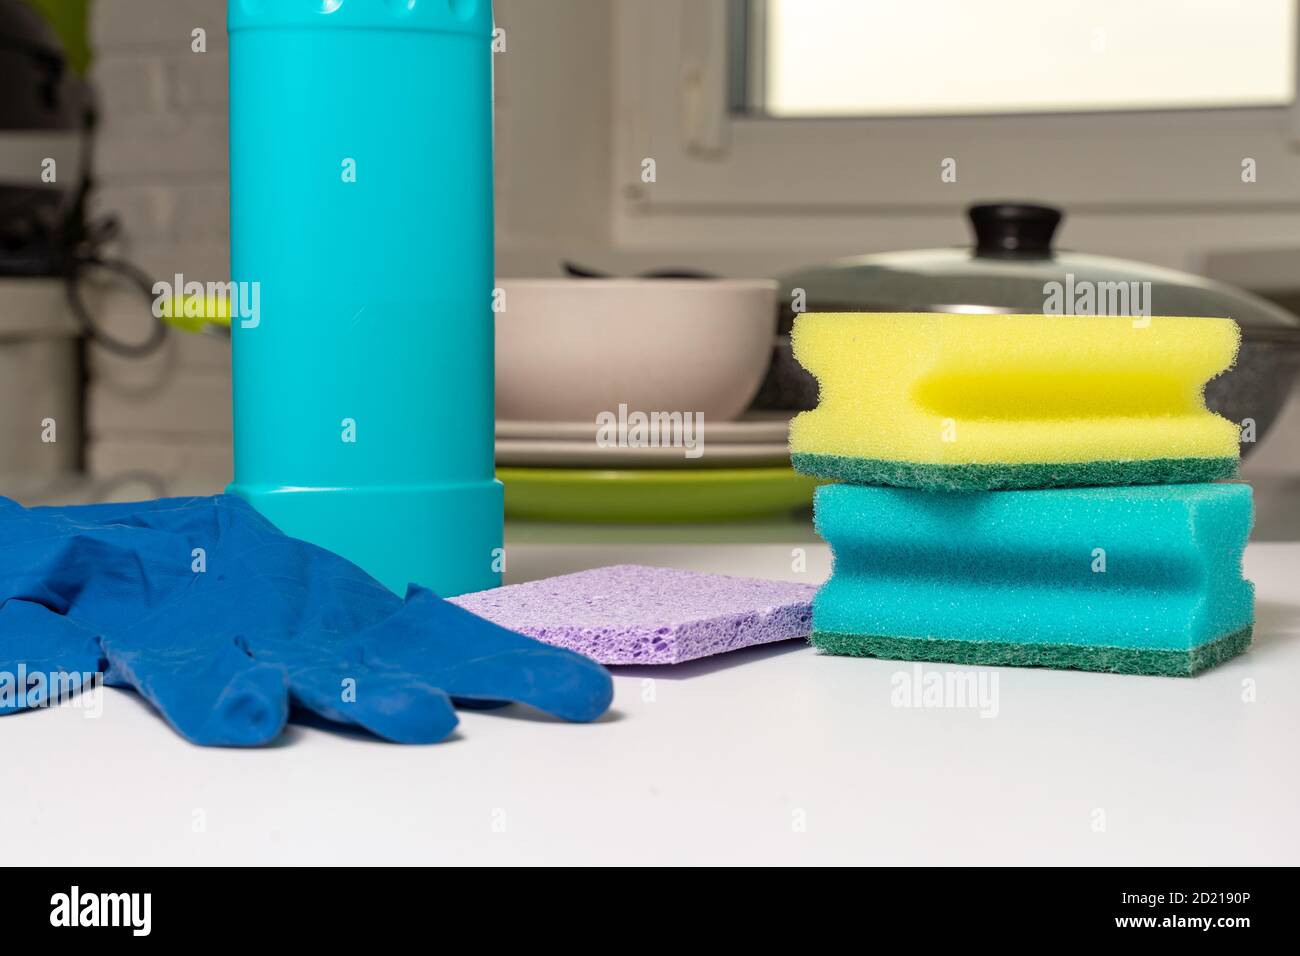 https://c8.alamy.com/comp/2D2190P/set-of-dishwashing-detergents-on-the-kitchen-table-dirty-dishes-in-the-background-2D2190P.jpg